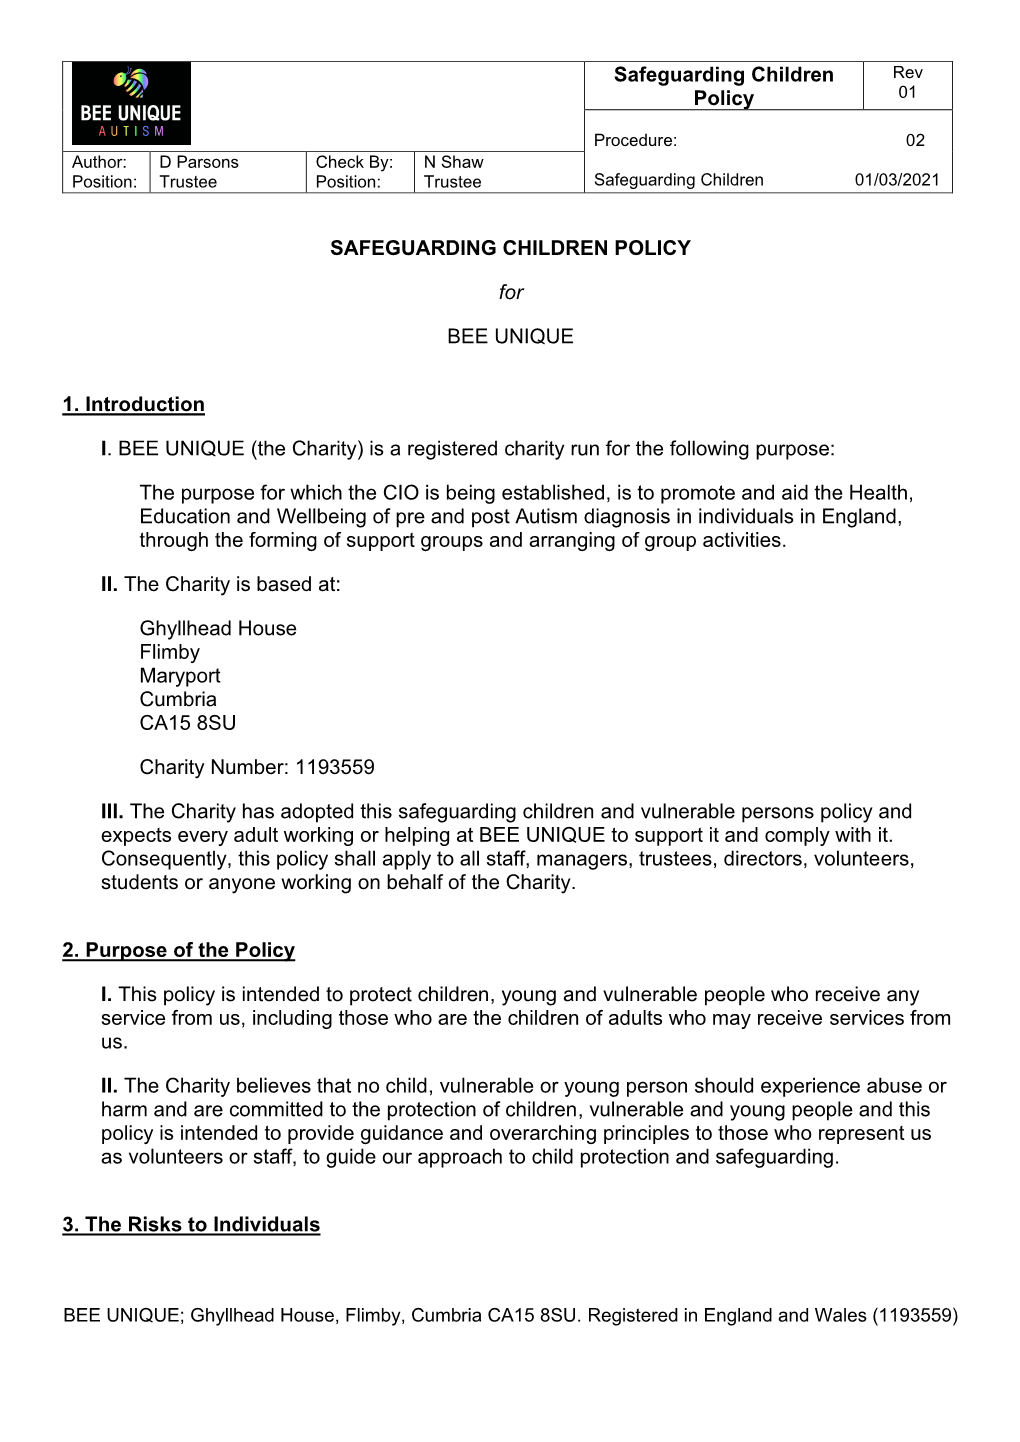 Safeguarding Children Policy